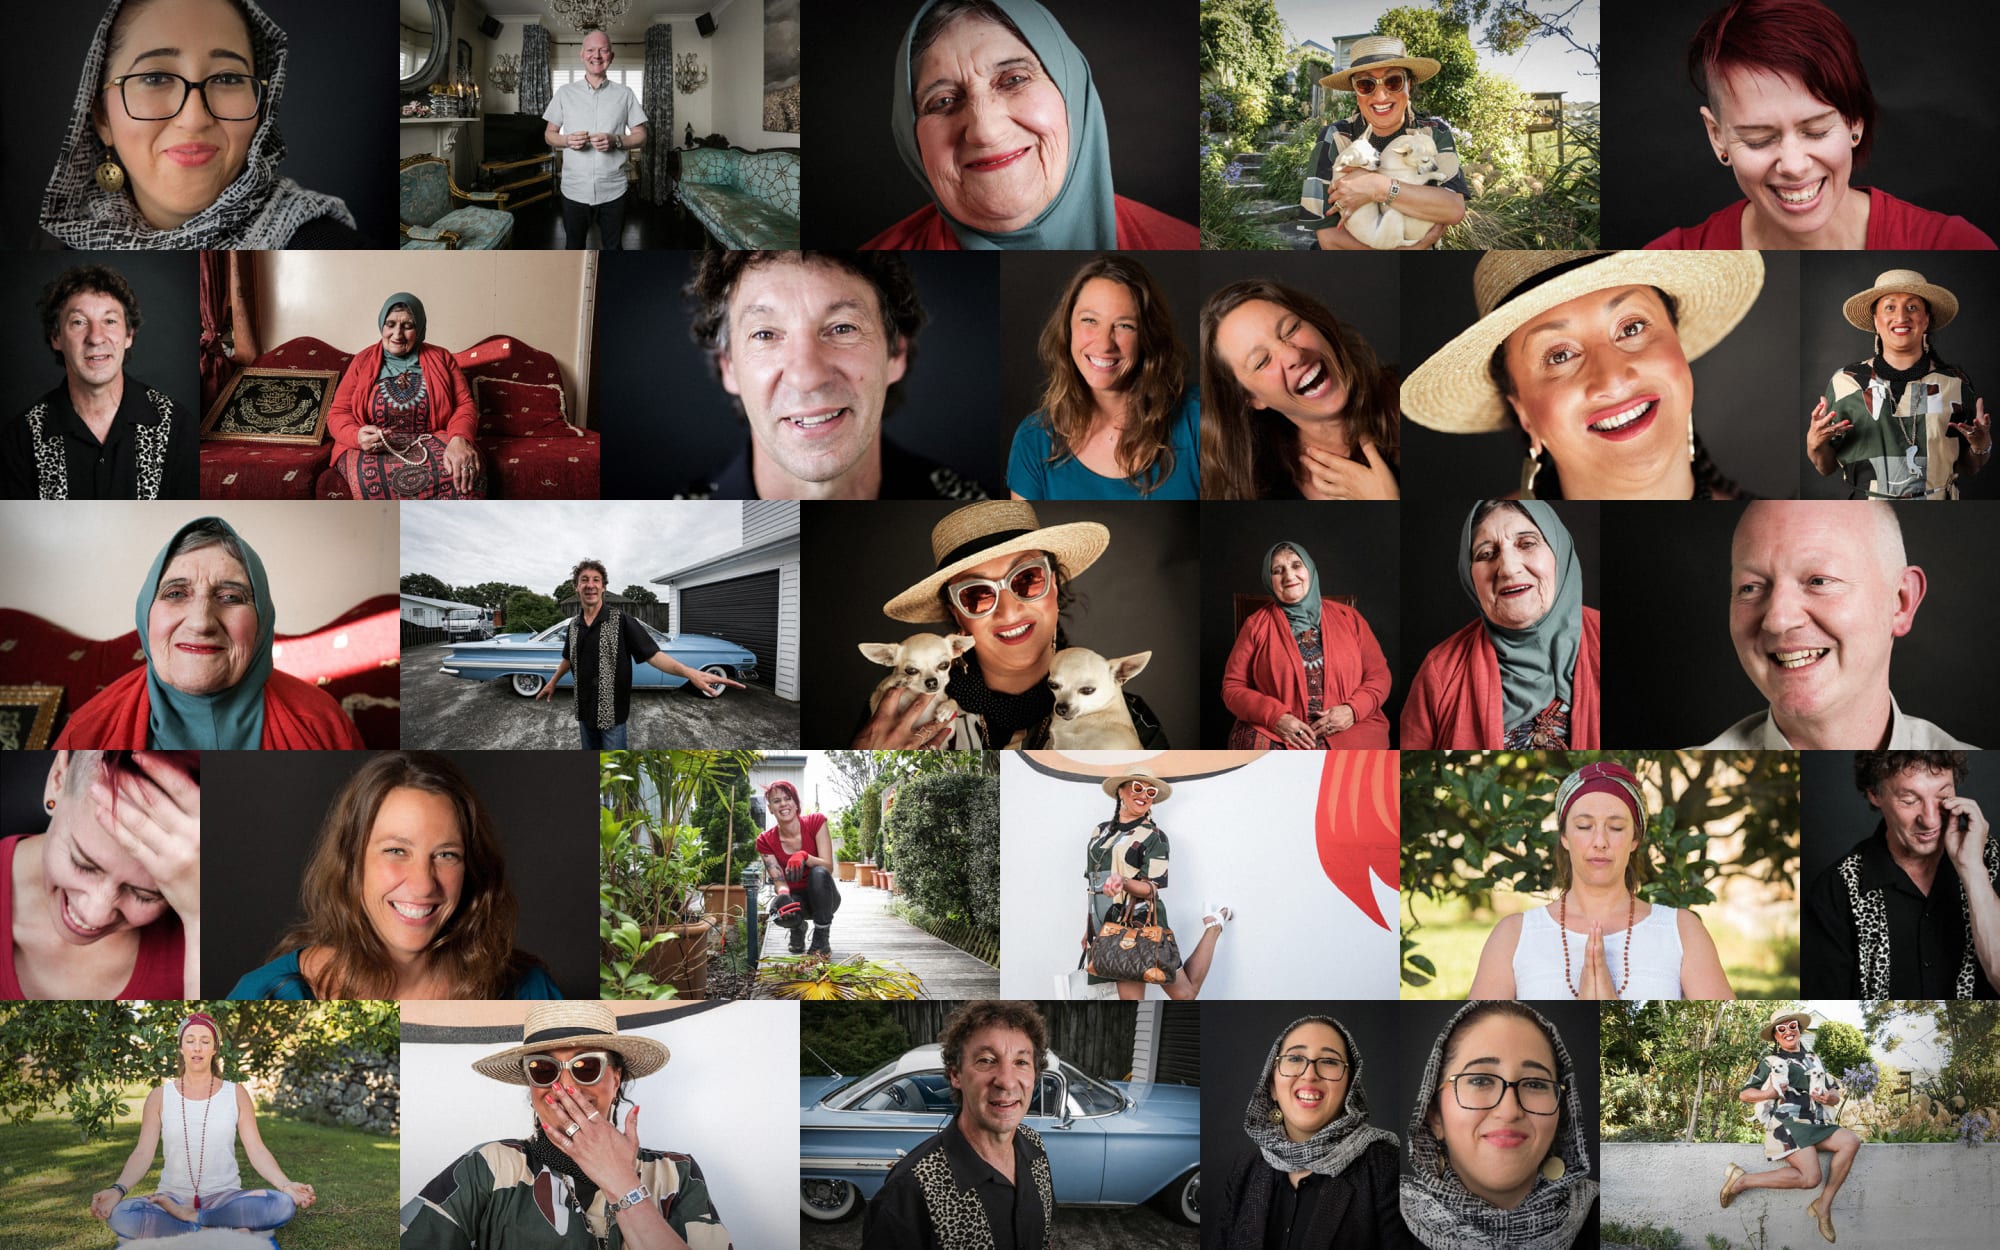 The many faces of the RNZ Joy Project, a look at happiness.